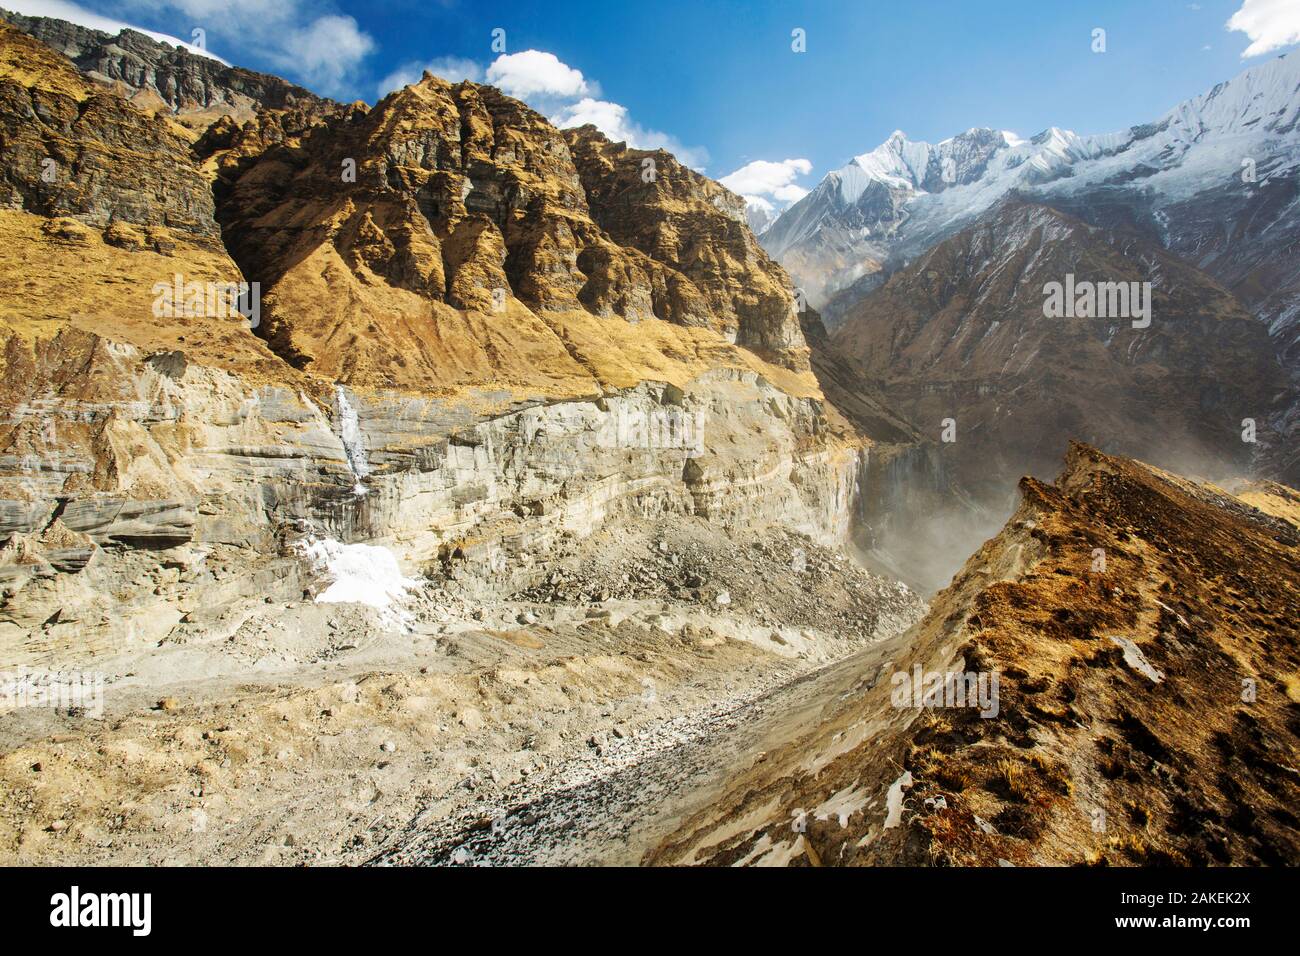 U shaped valley caused by rapidly retreating South Annapurna glacier in the Annapurna sanctuary, Nepalese Himalayas, Nepal. December 2012. Stock Photo